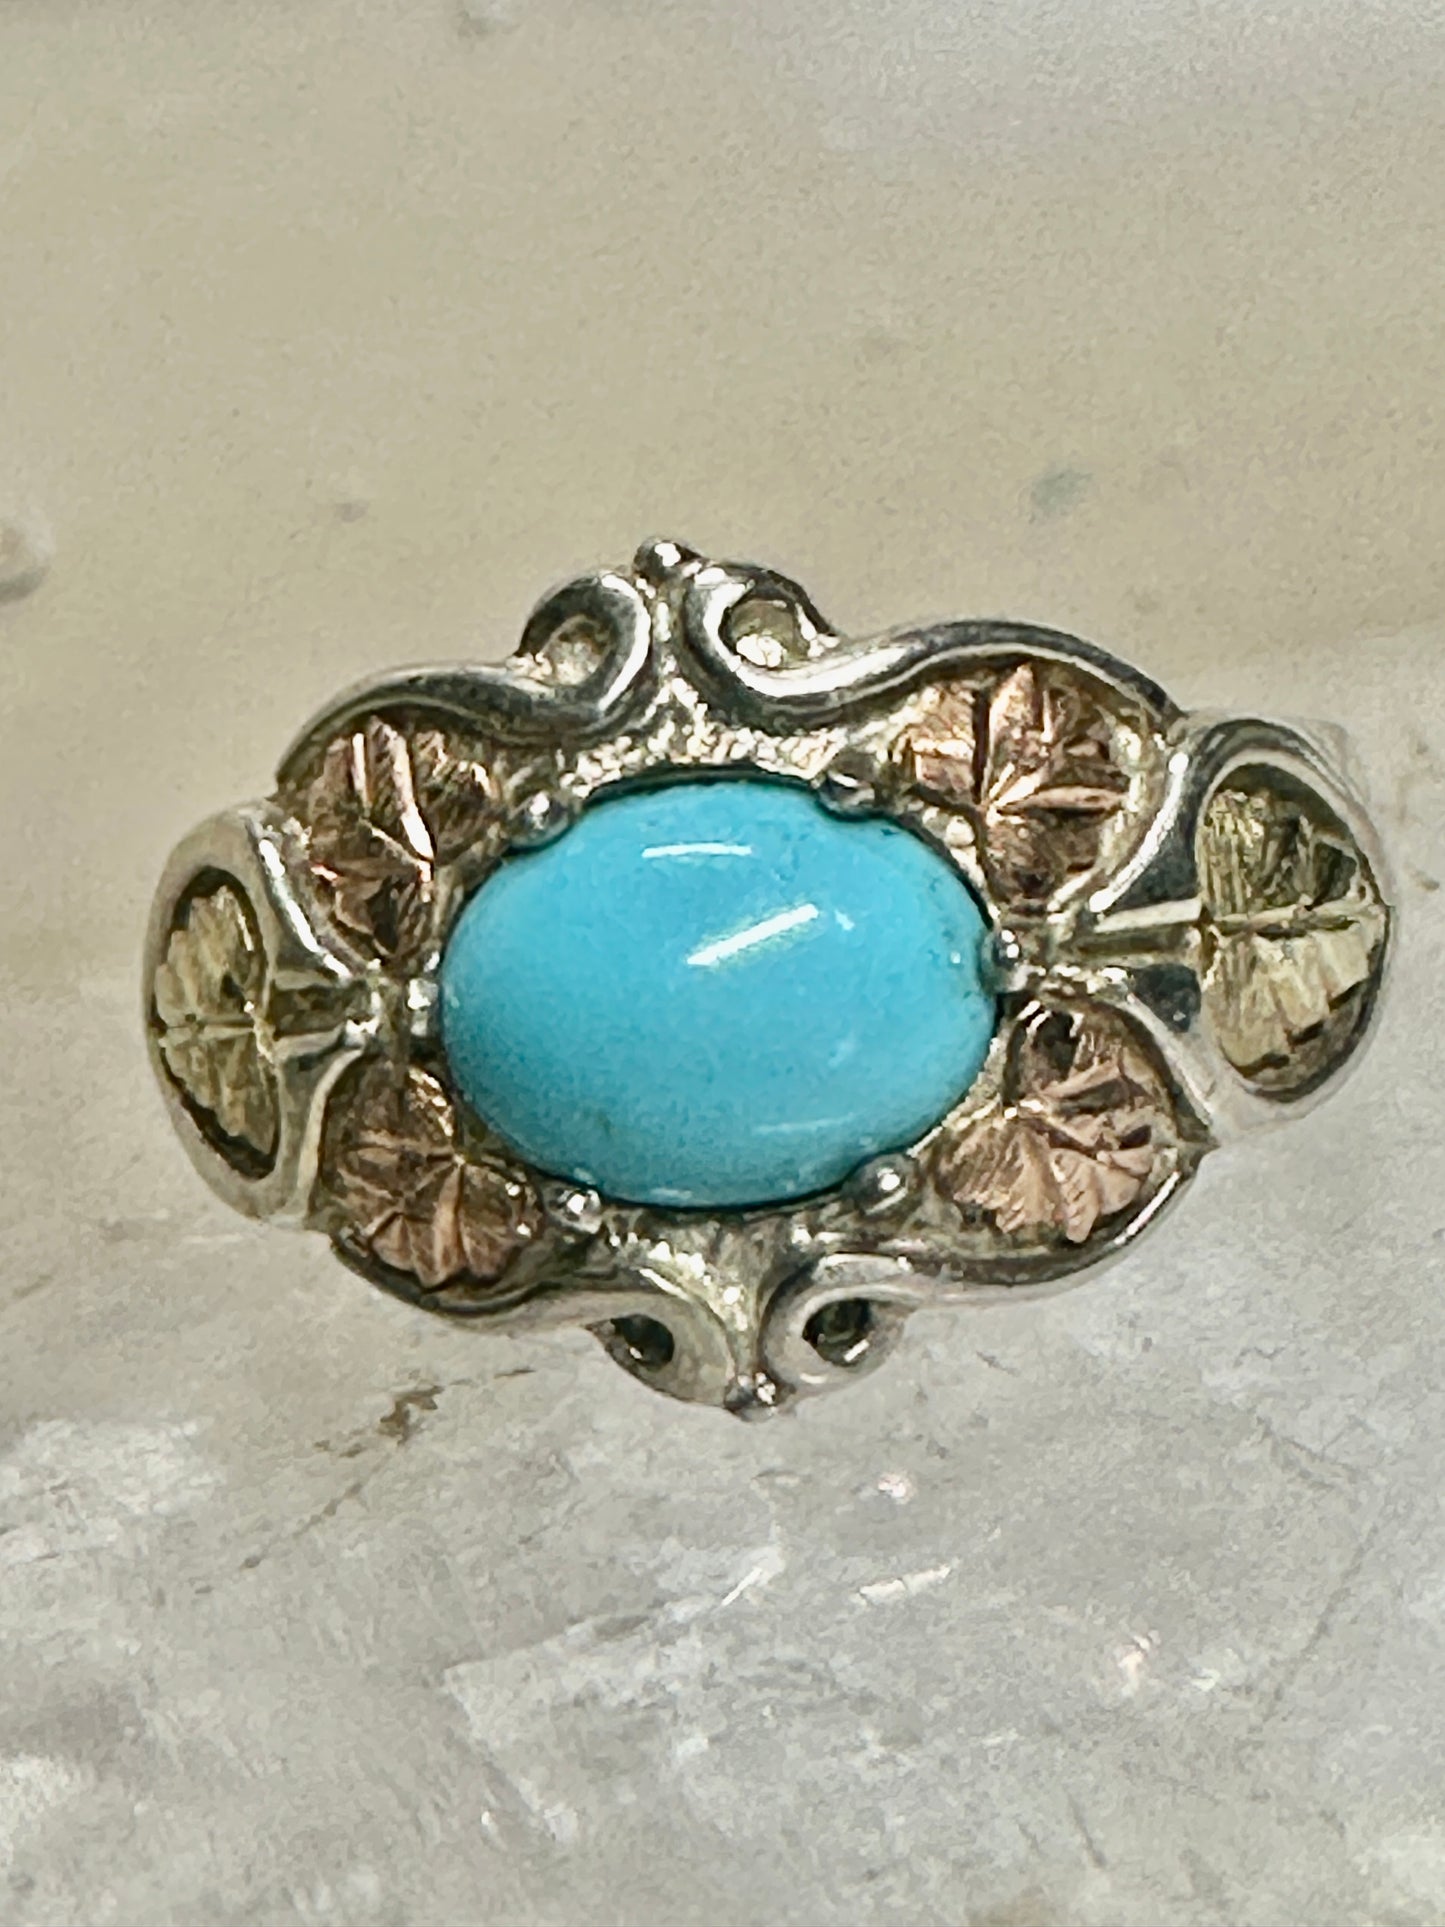 Black Hills Gold ring turquoise band size 7 sterling silver women 12K